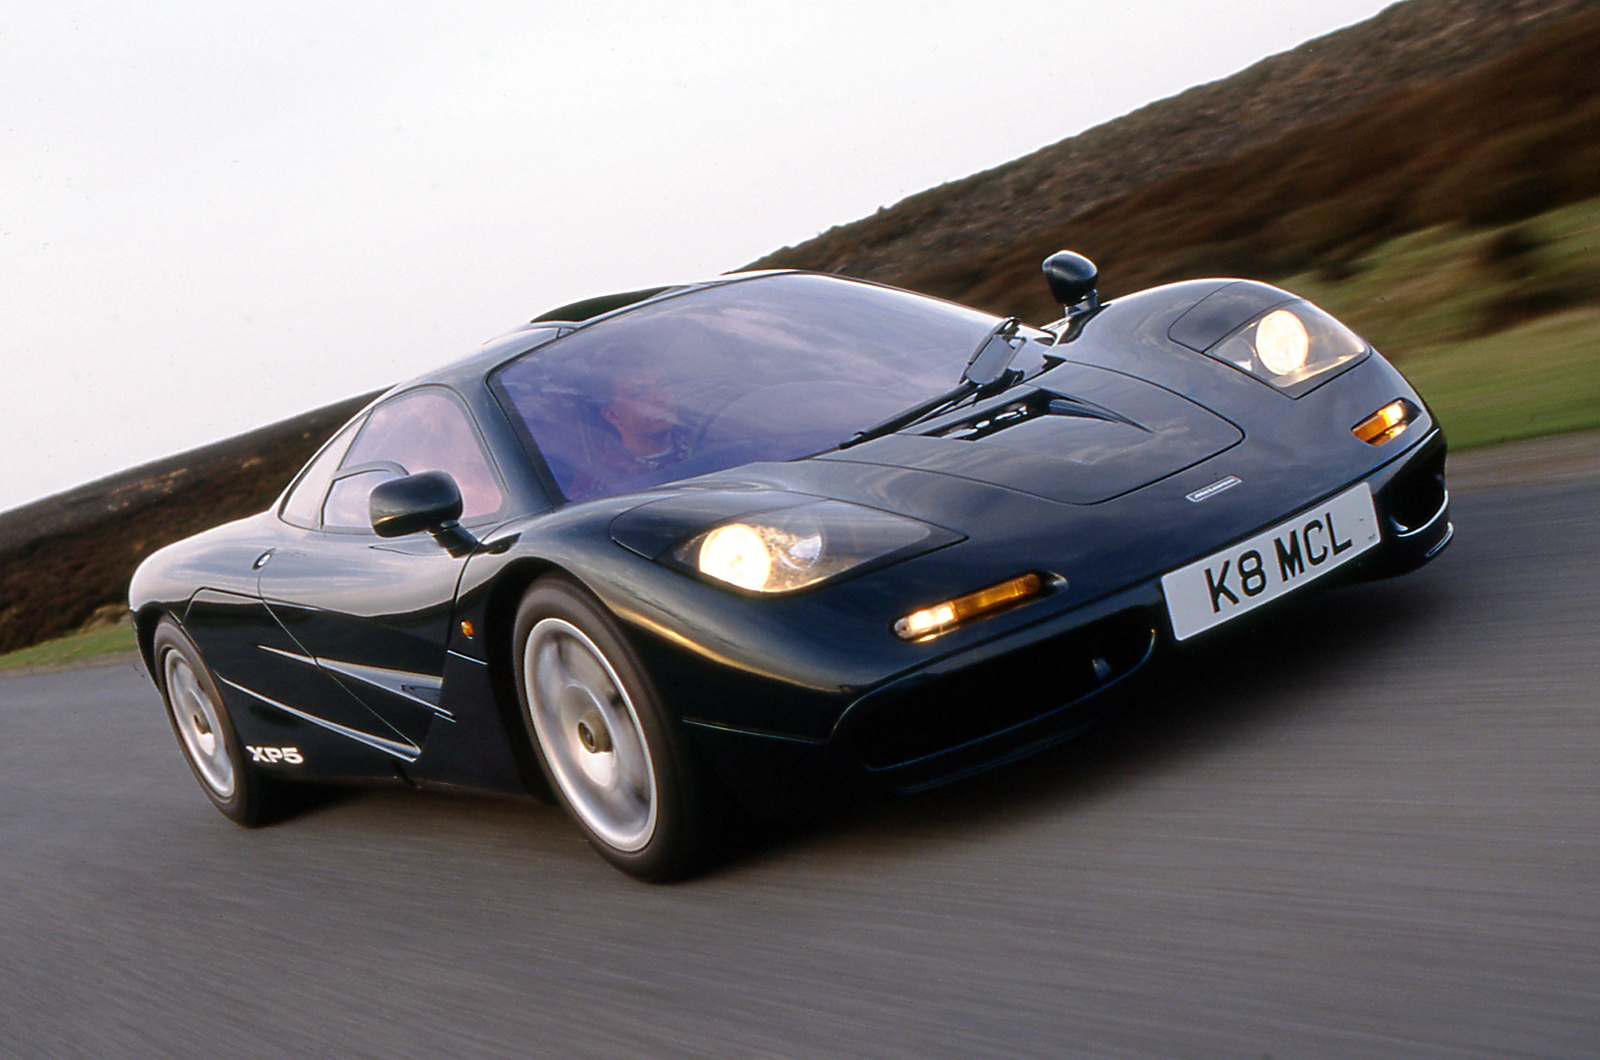 Here's What Separates The McLaren F1 LM From The Standard Supercar